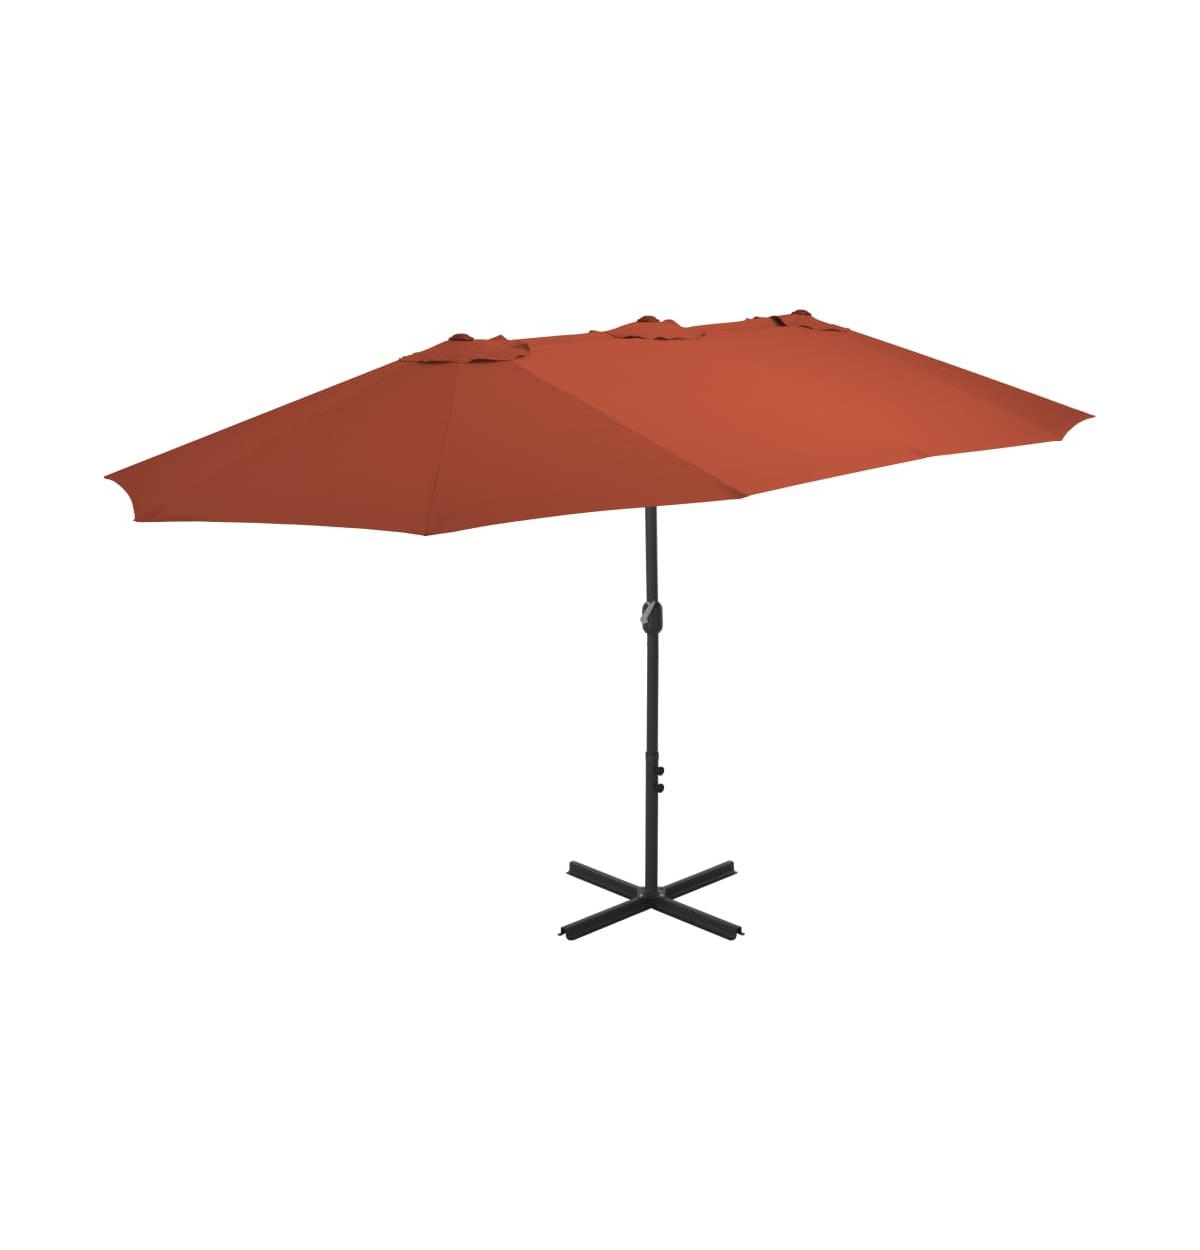 Outdoor Parasol with Aluminum Pole 181.1"x106.3" Terracotta - Red